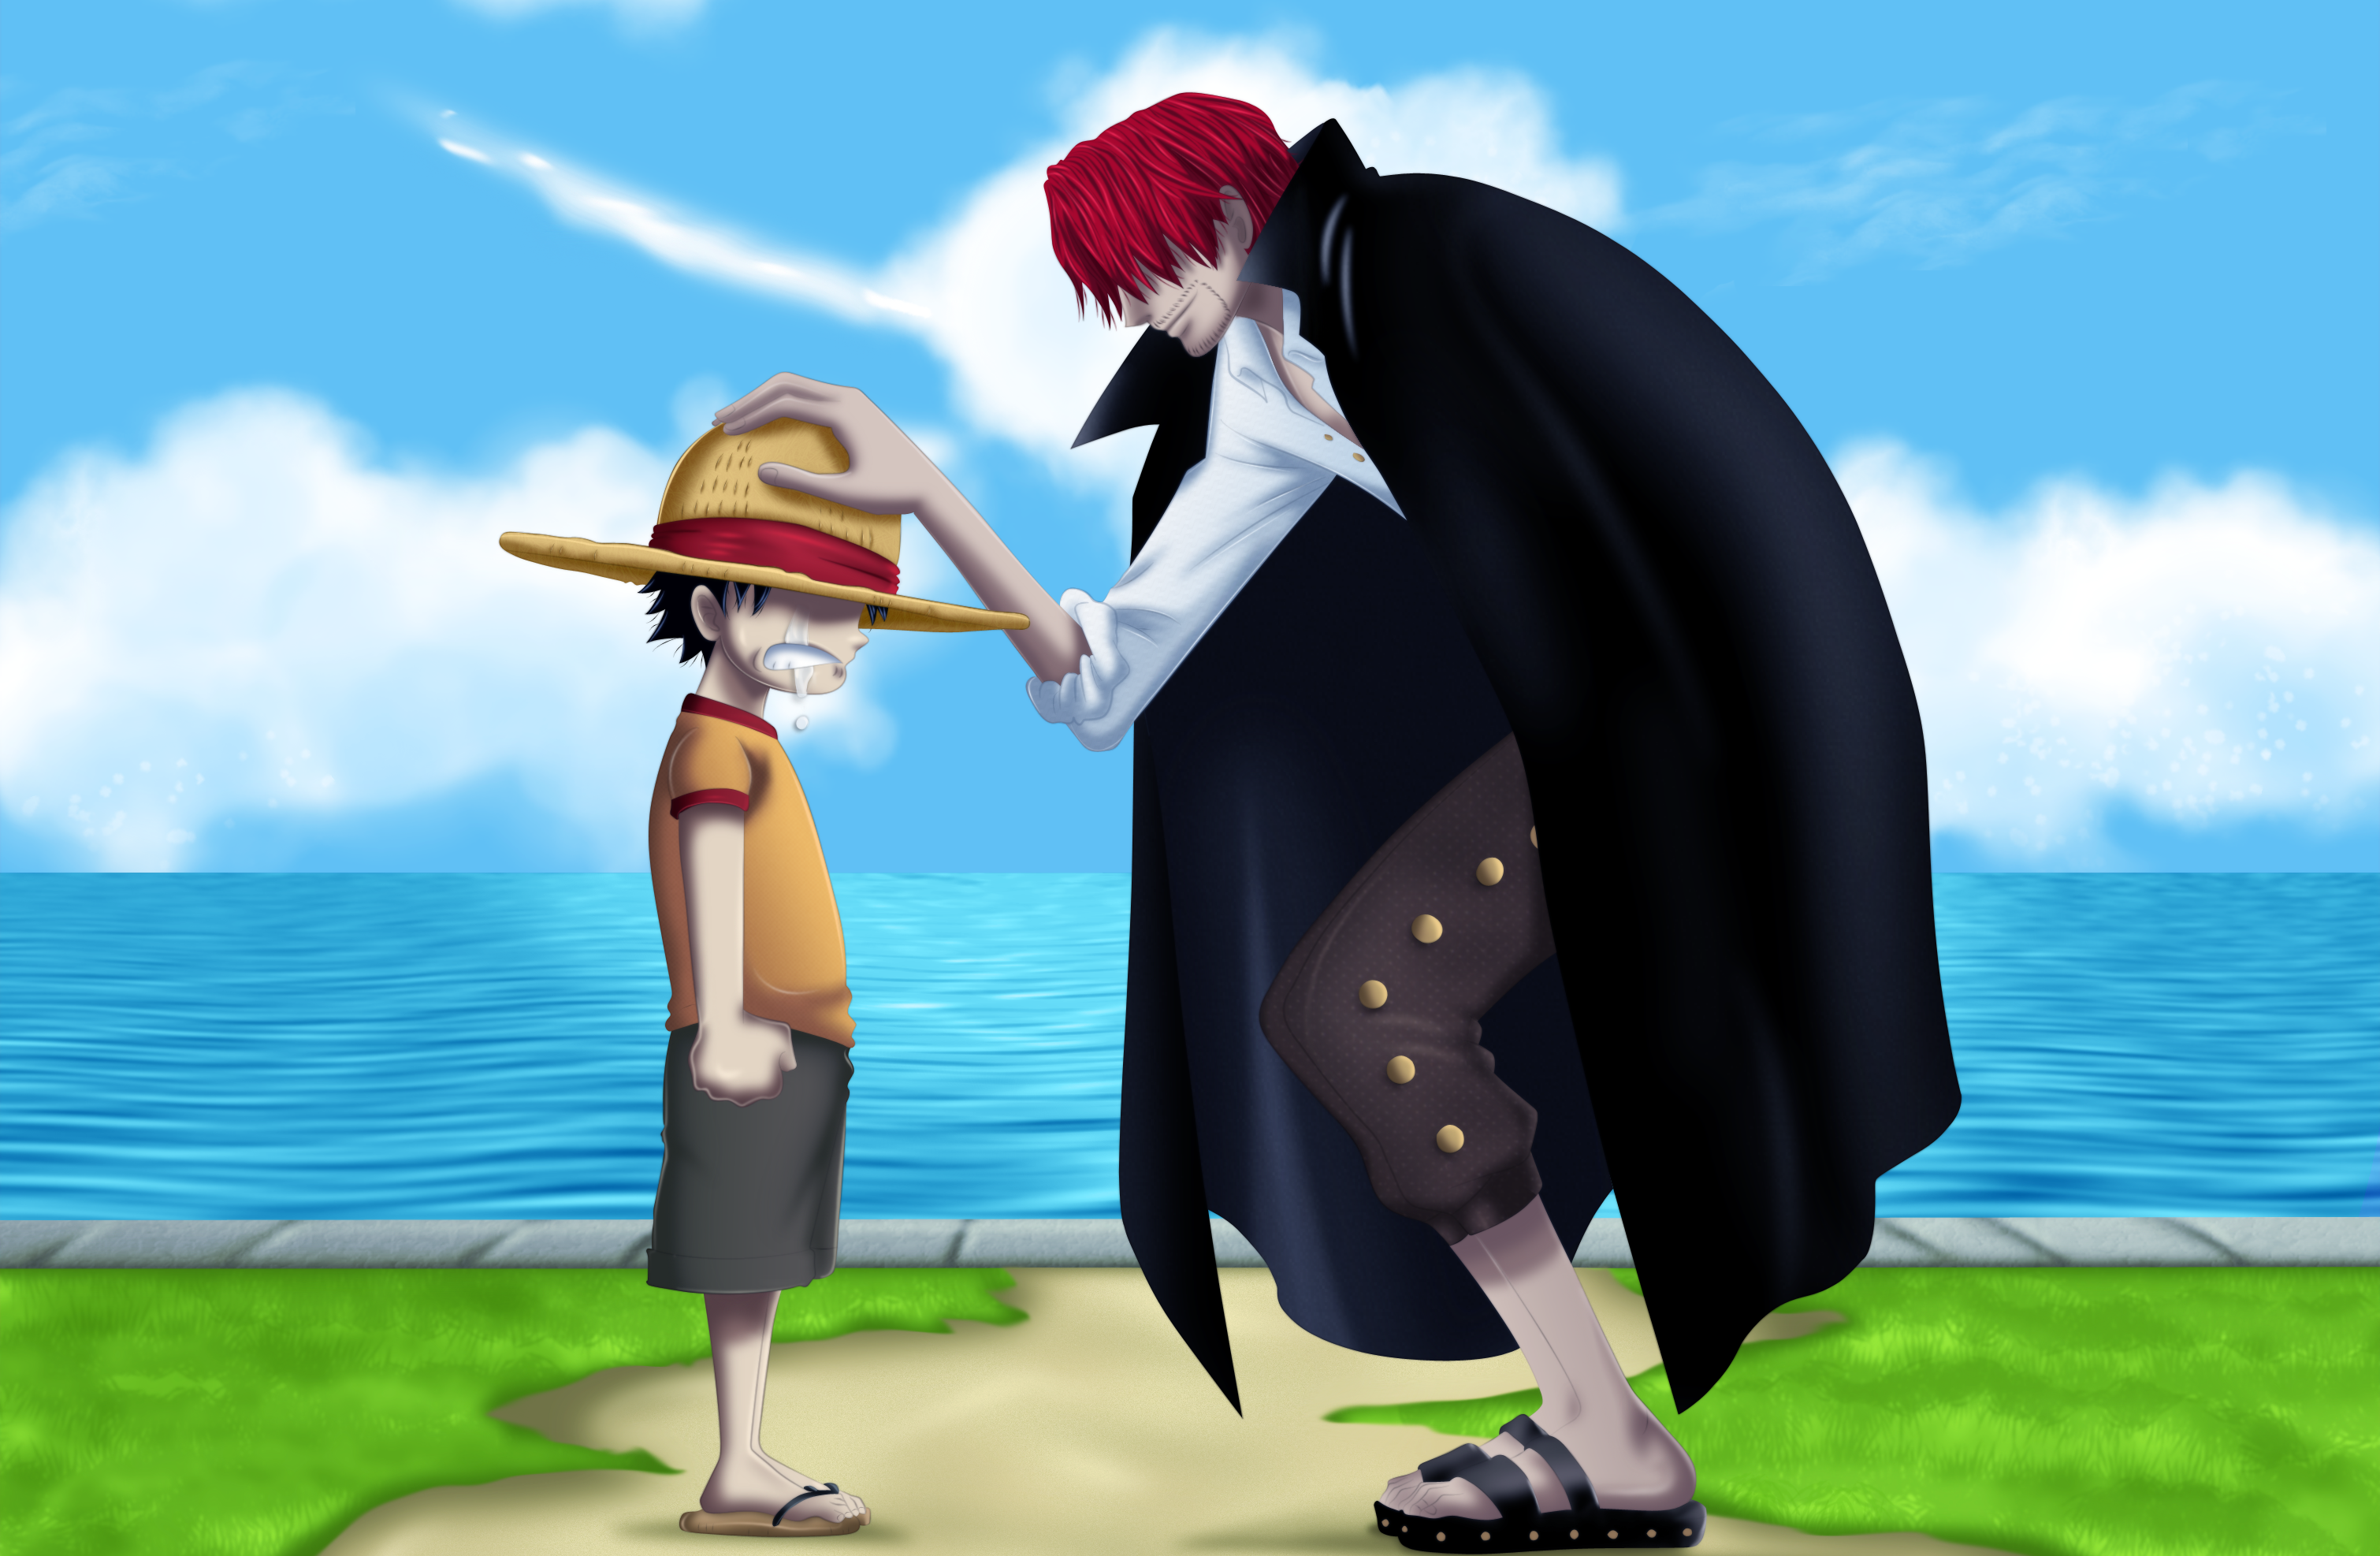 Akagami No Shanks Hd, Download Wallpapers on Jakpost.travel.